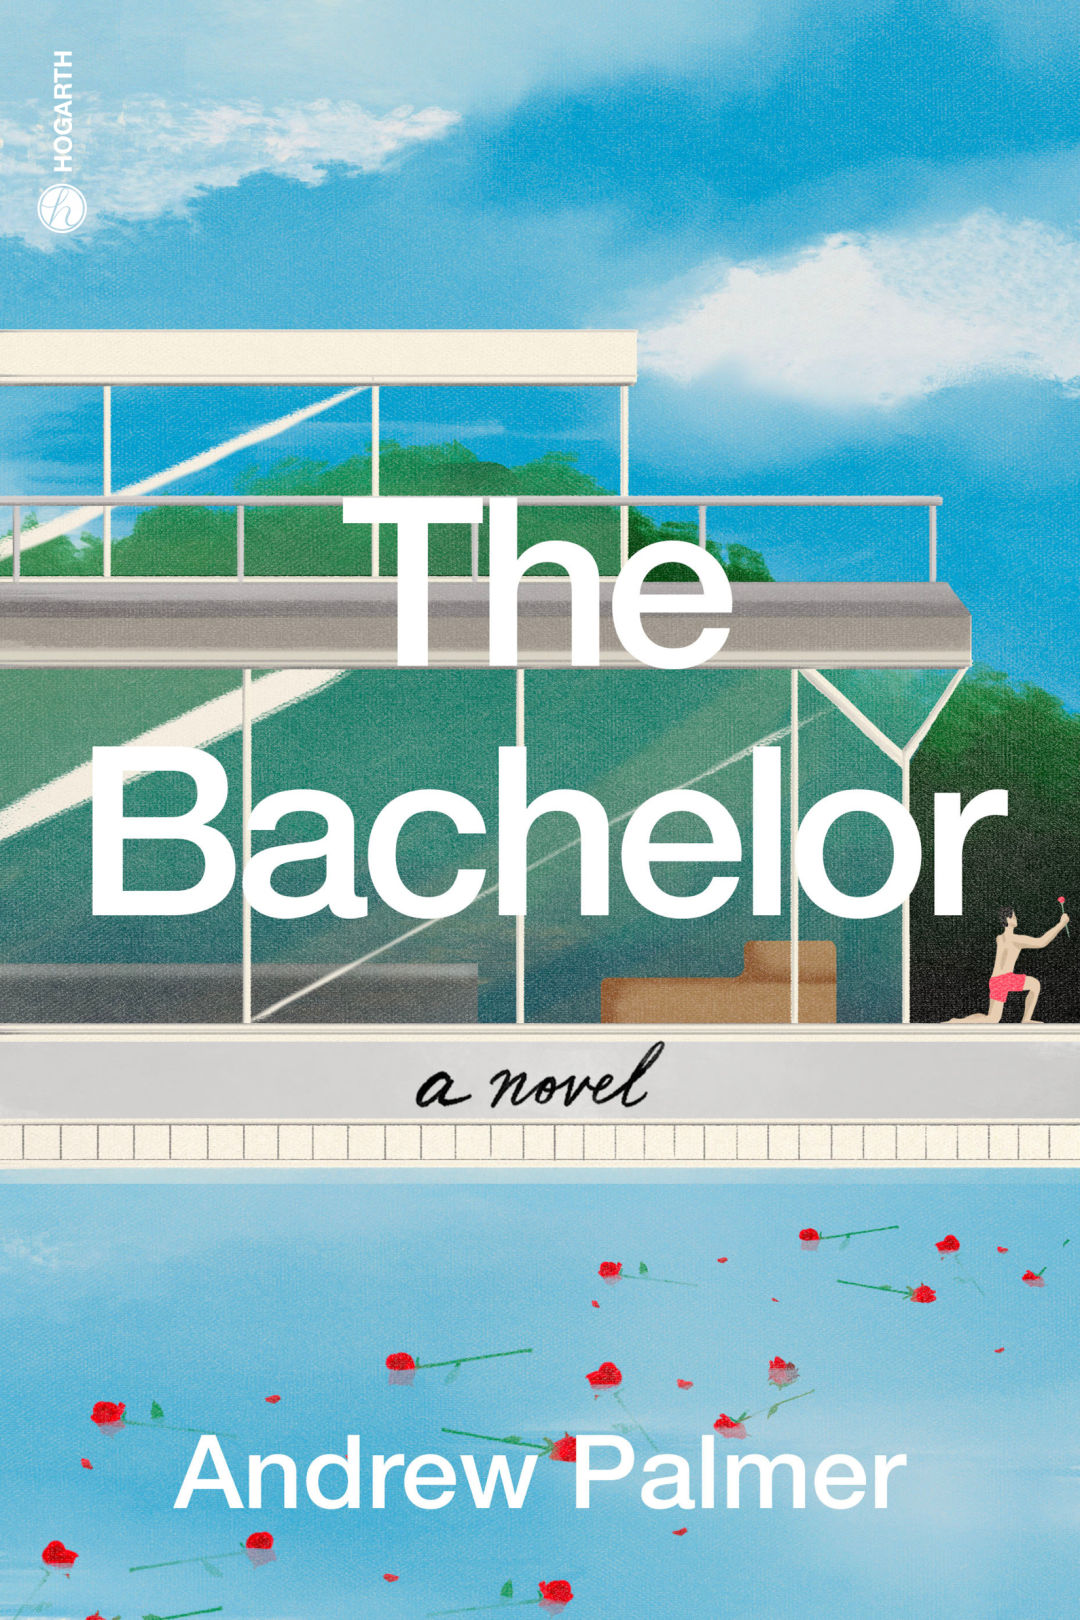 Seattle’s 'The Bachelor' Is Way Better Than Hollywood’s Seattle Met